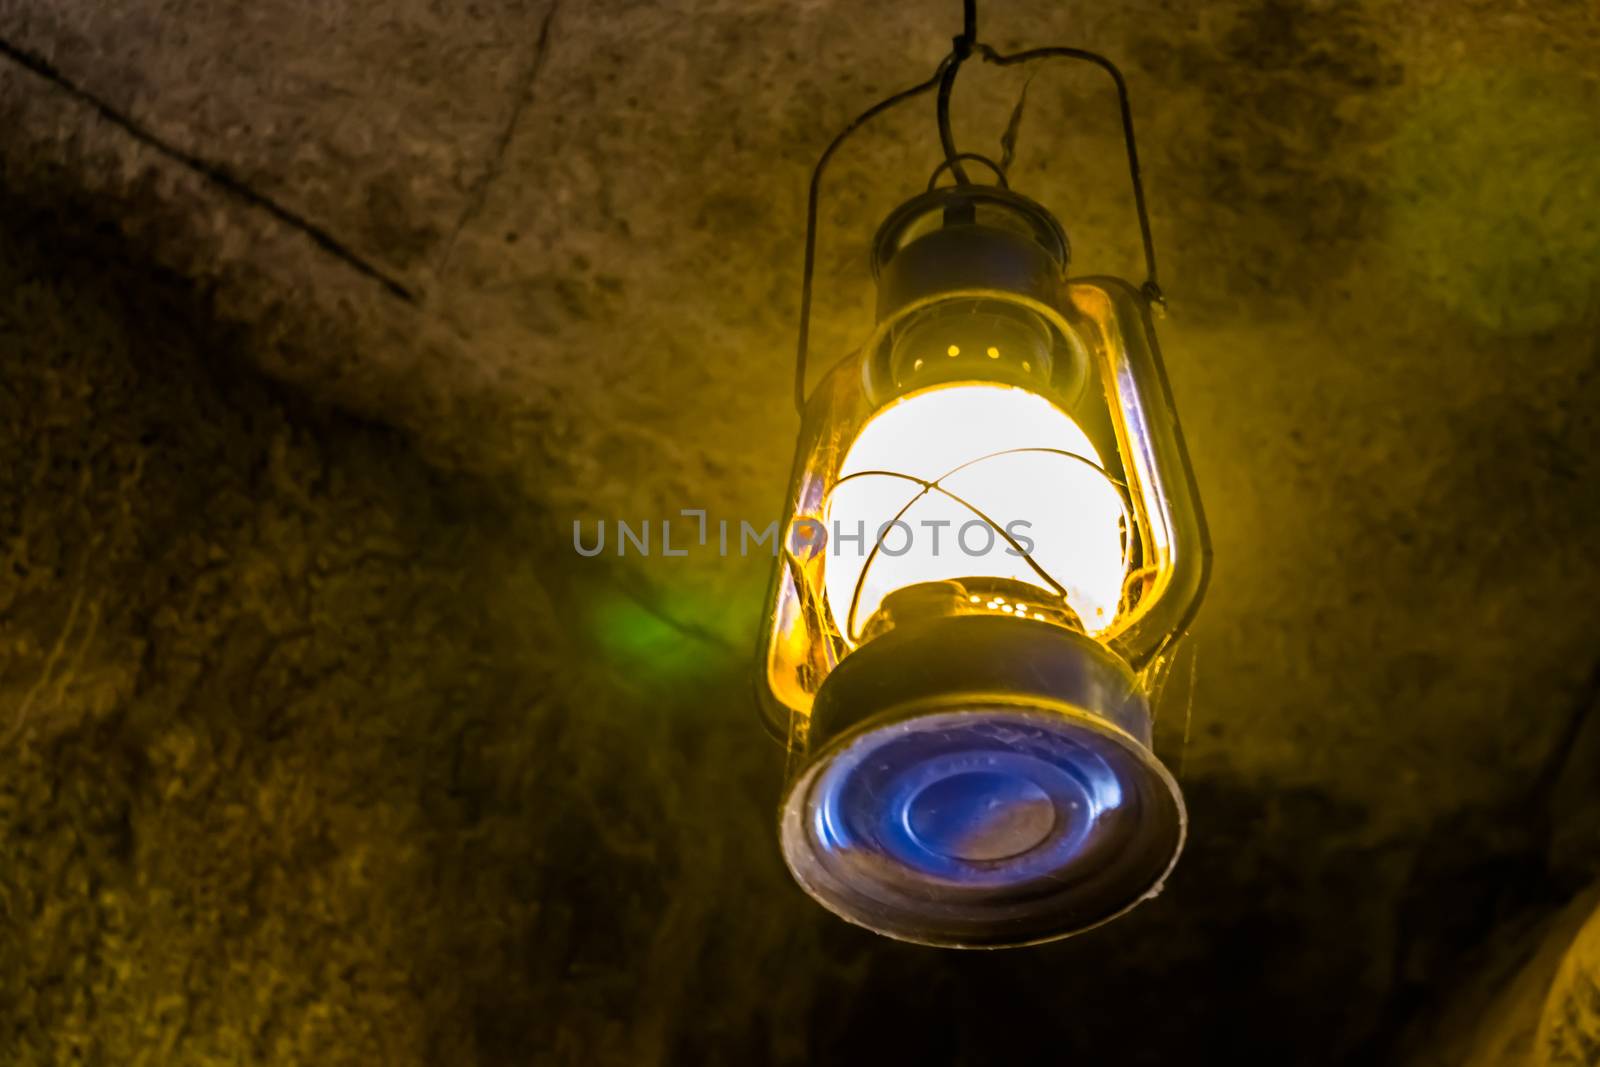 lighted vintage lantern hanging on the roof of a cave, nostalgic mining equipment